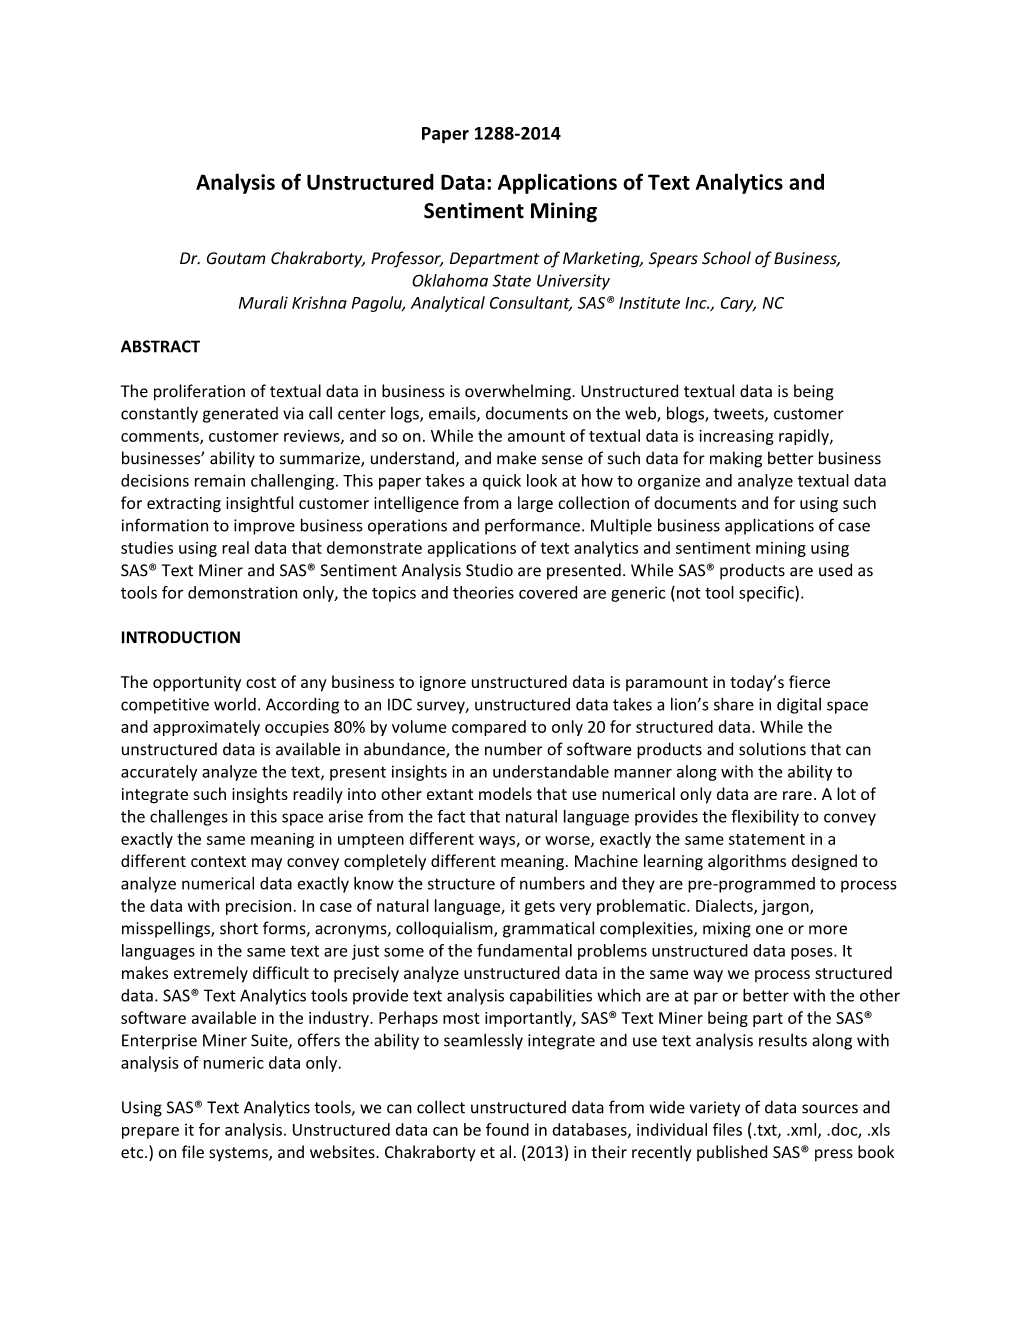 Analysis of Unstructured Data: Applications of Text Analytics and Sentiment Mining